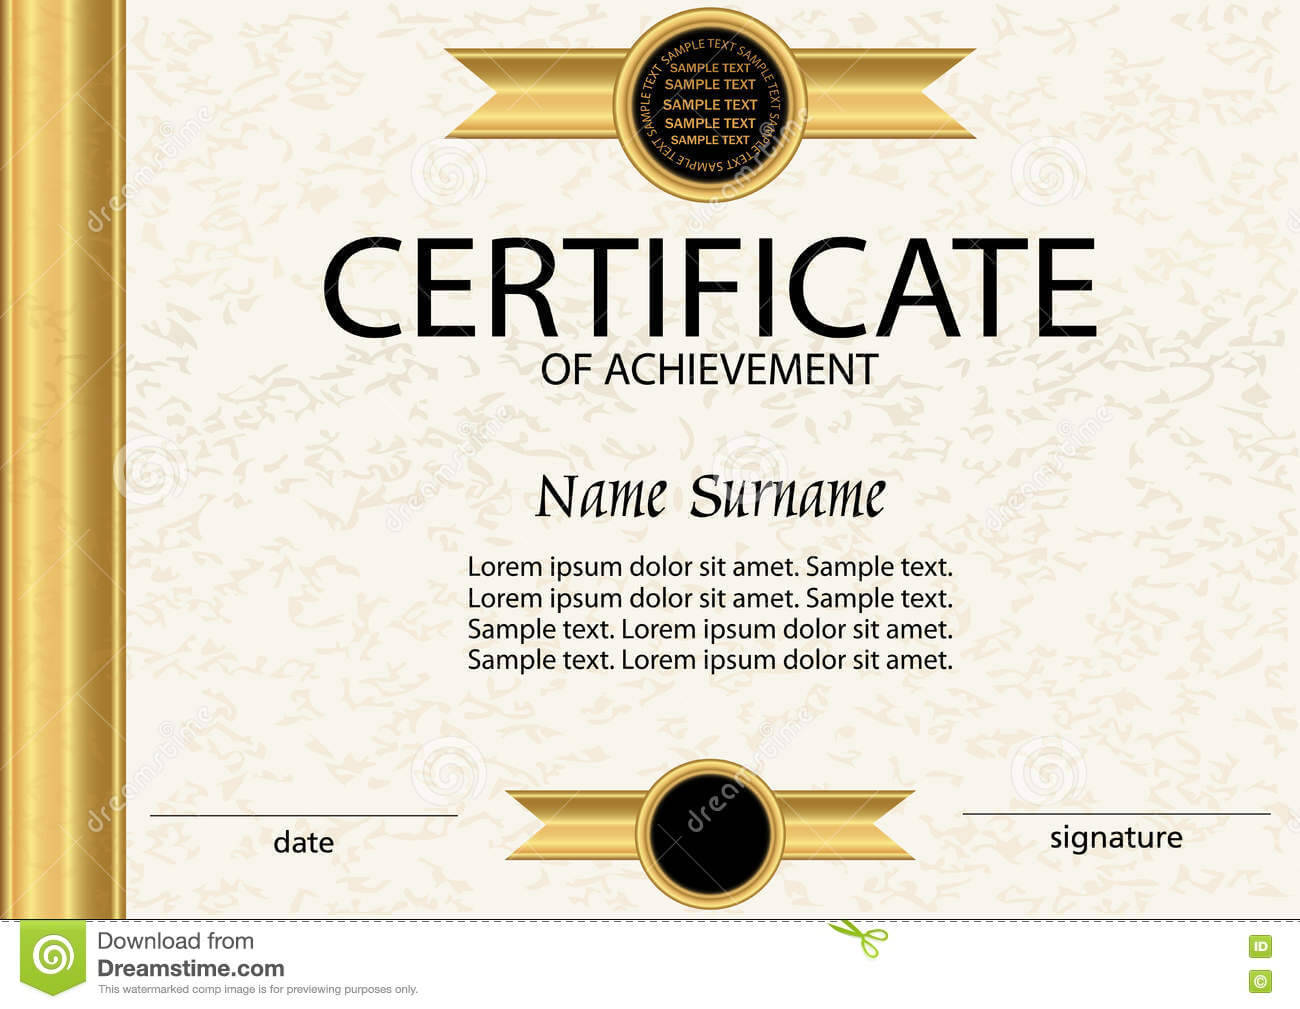 Certificate Of Achievement Or Diploma Template. Vector Stock Inside Certificate Of Attainment Template